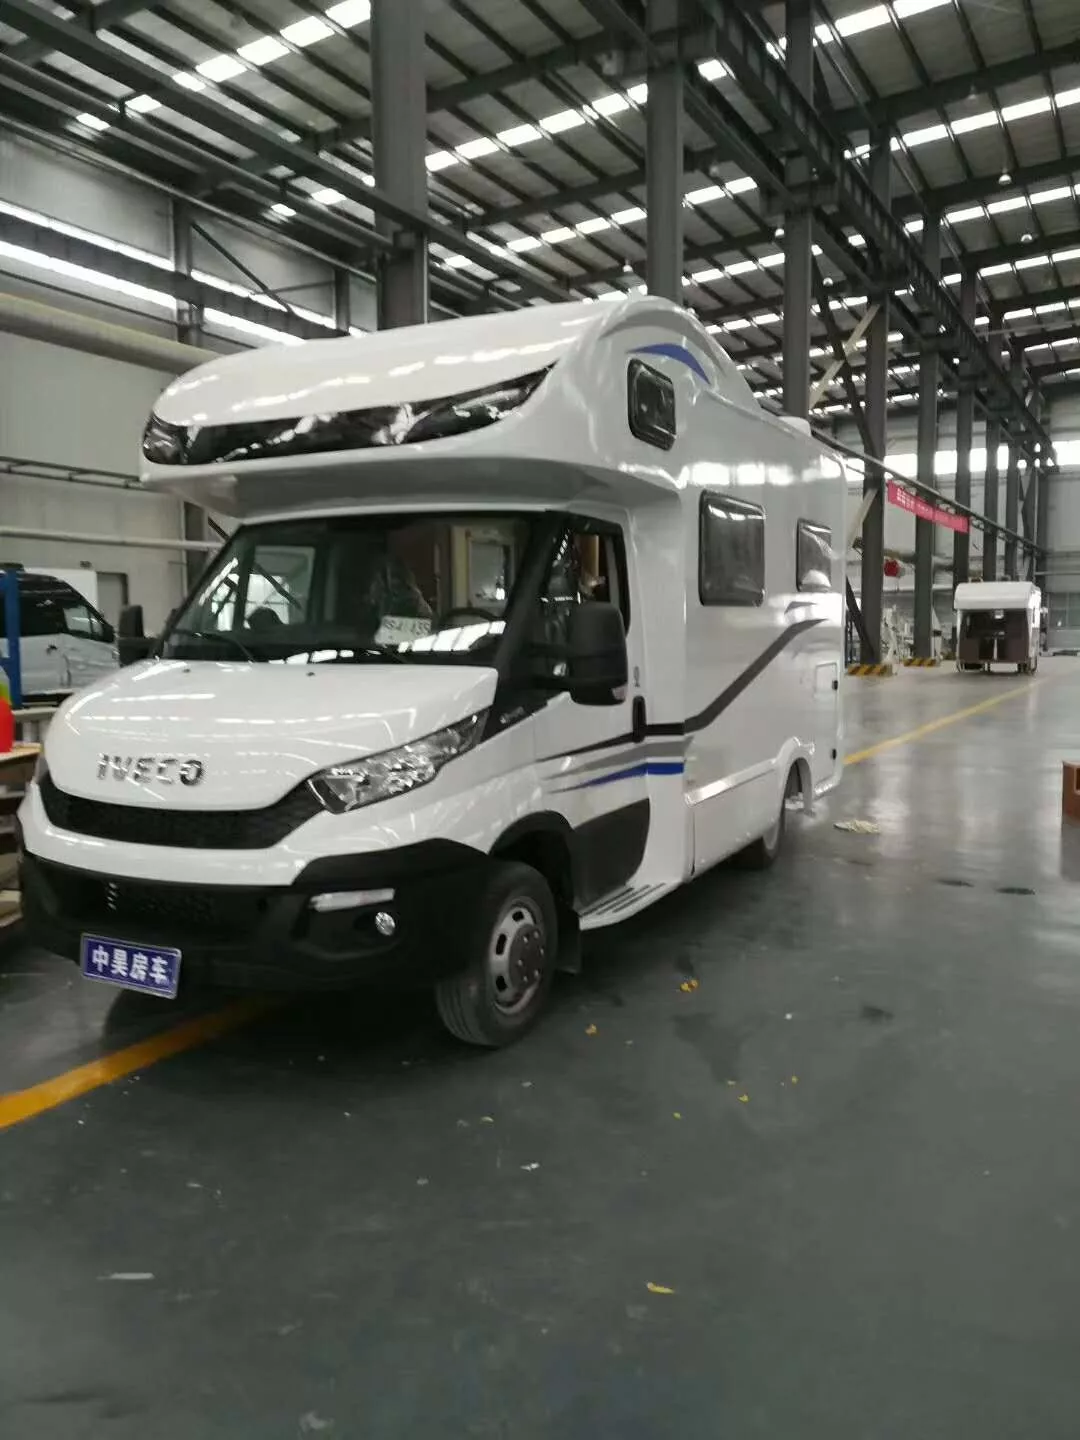 Zhonghao imported RVs joined the 5.31—6.2 Nanjing International Vacation Leisure and RV Exhibition